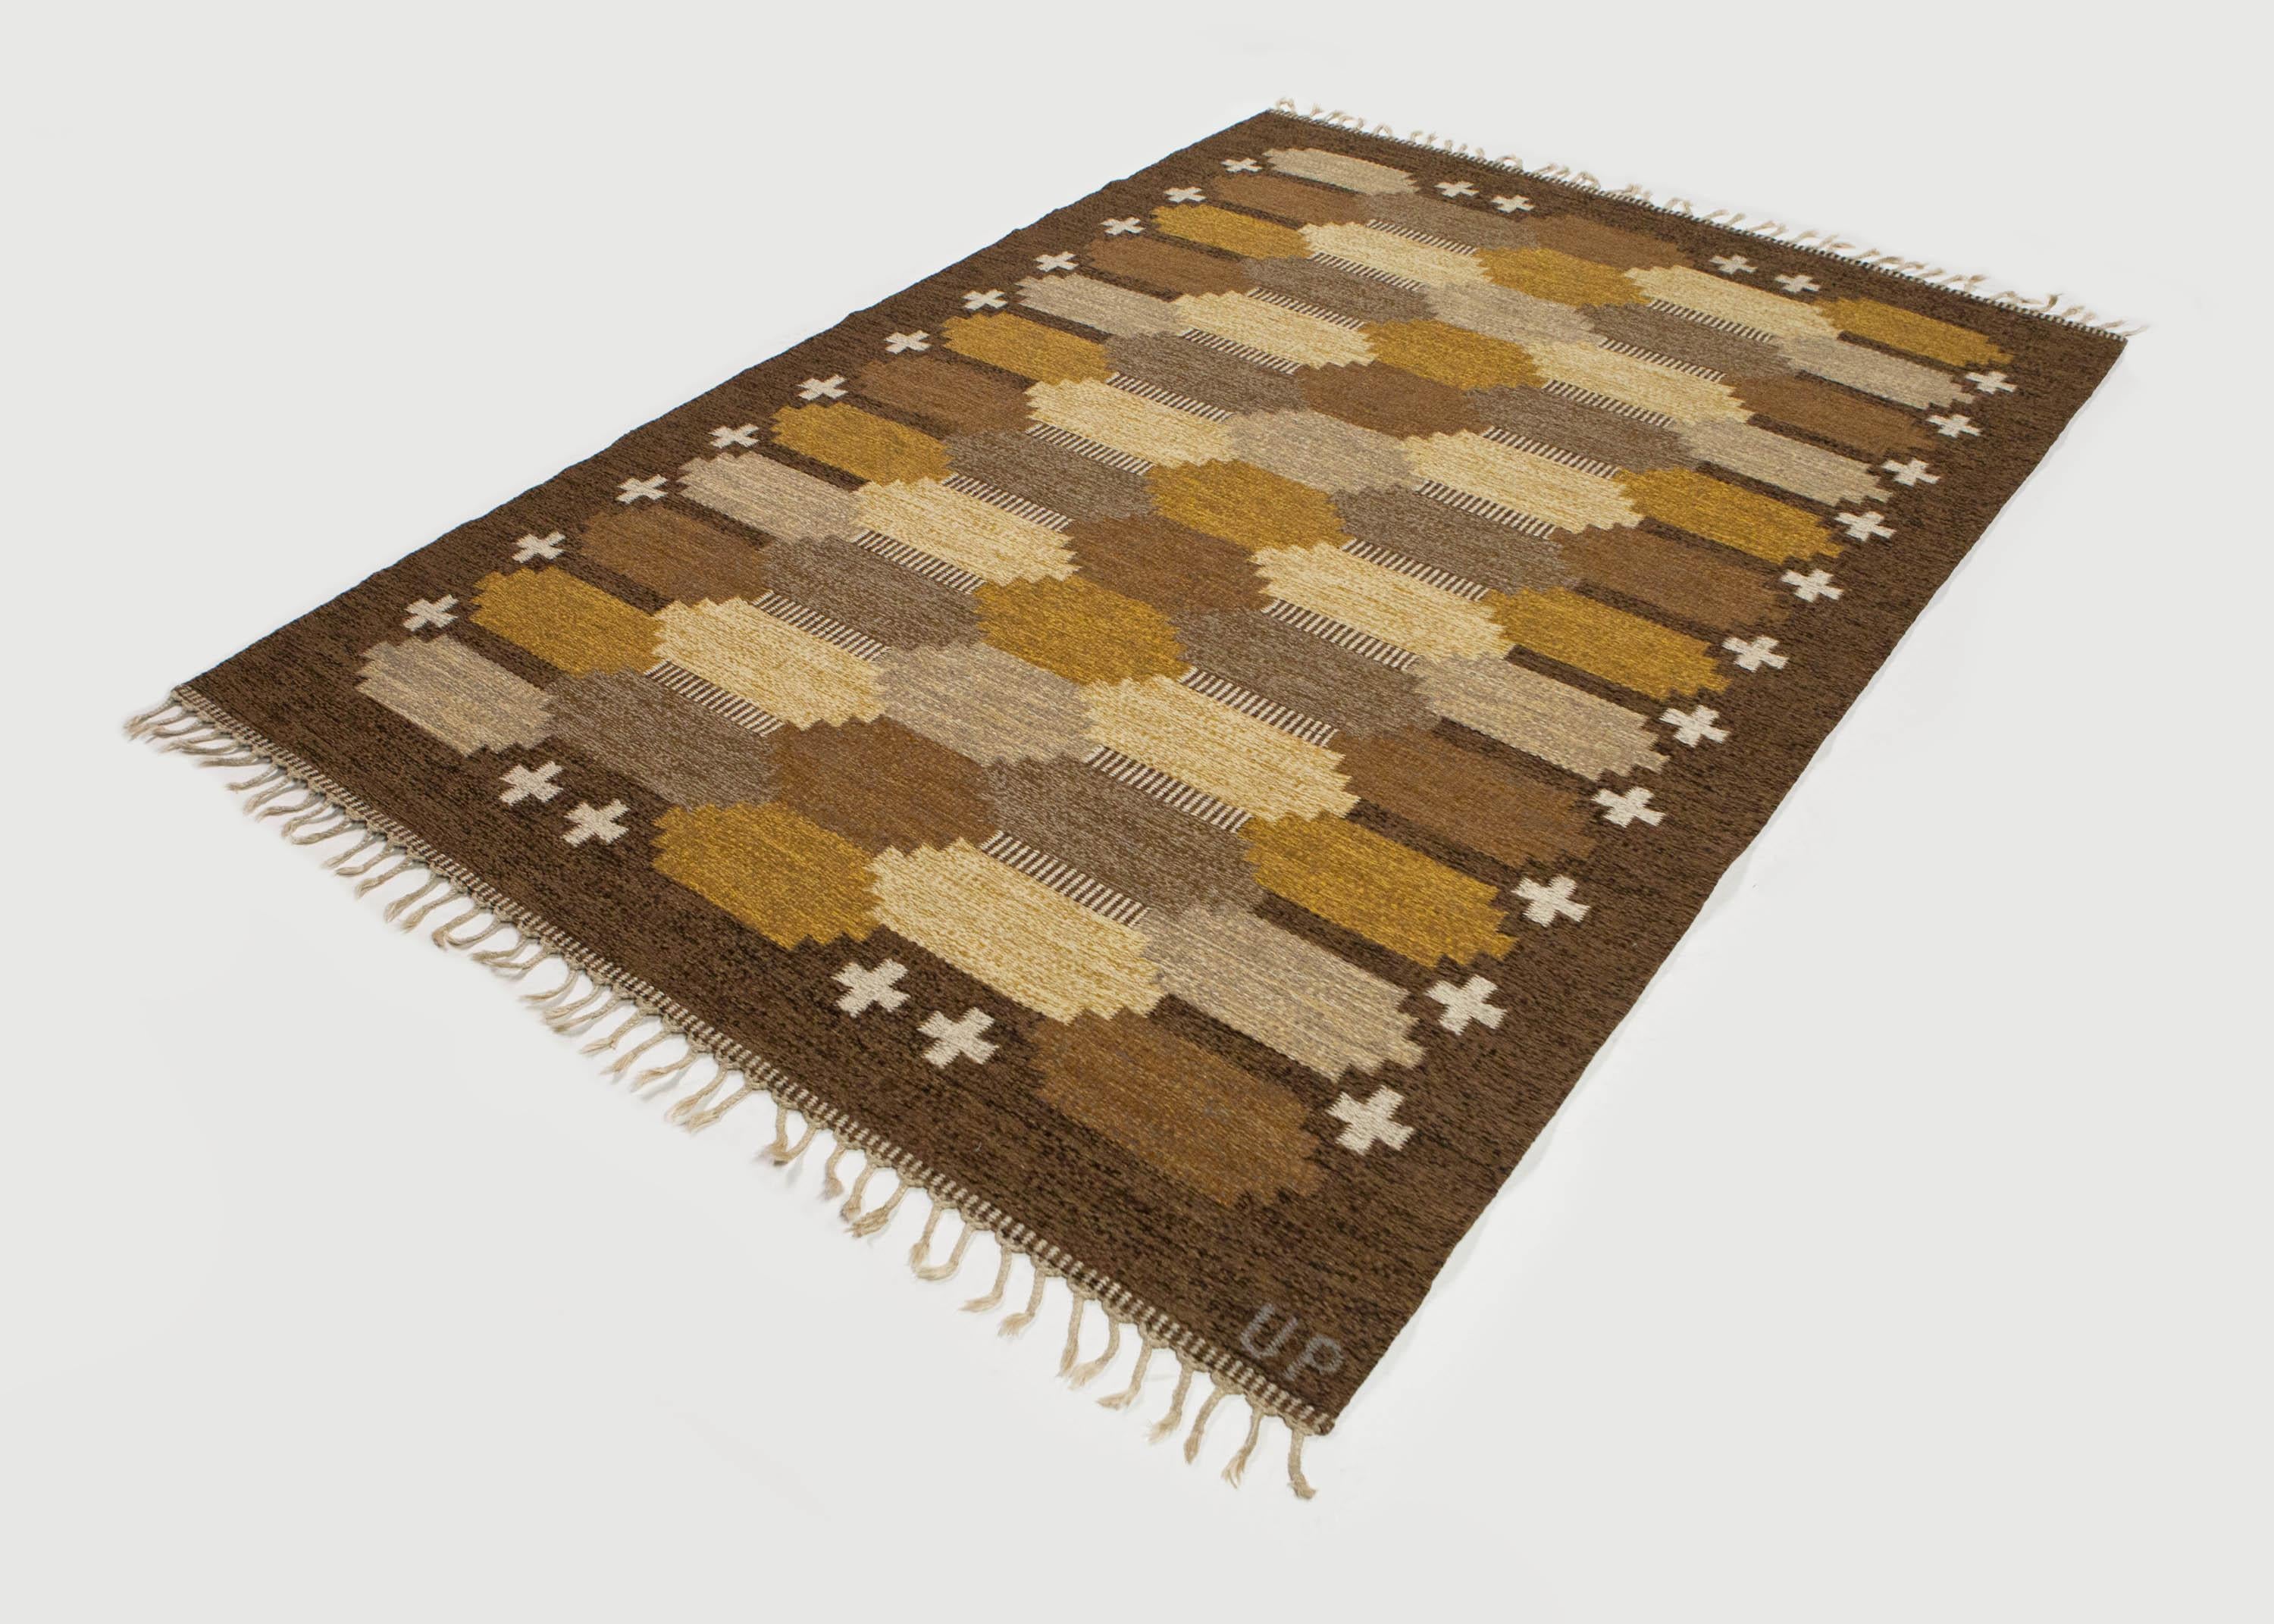 Ulla Parkdal Brown Swedish flat weave hand woven rug signed up Sweden 1960's

A dark brown melange ground with dense rows of stepped medallions in a variety of brown, yellow, grey and ivory nuances. A framework of ivory geometric shapes.

